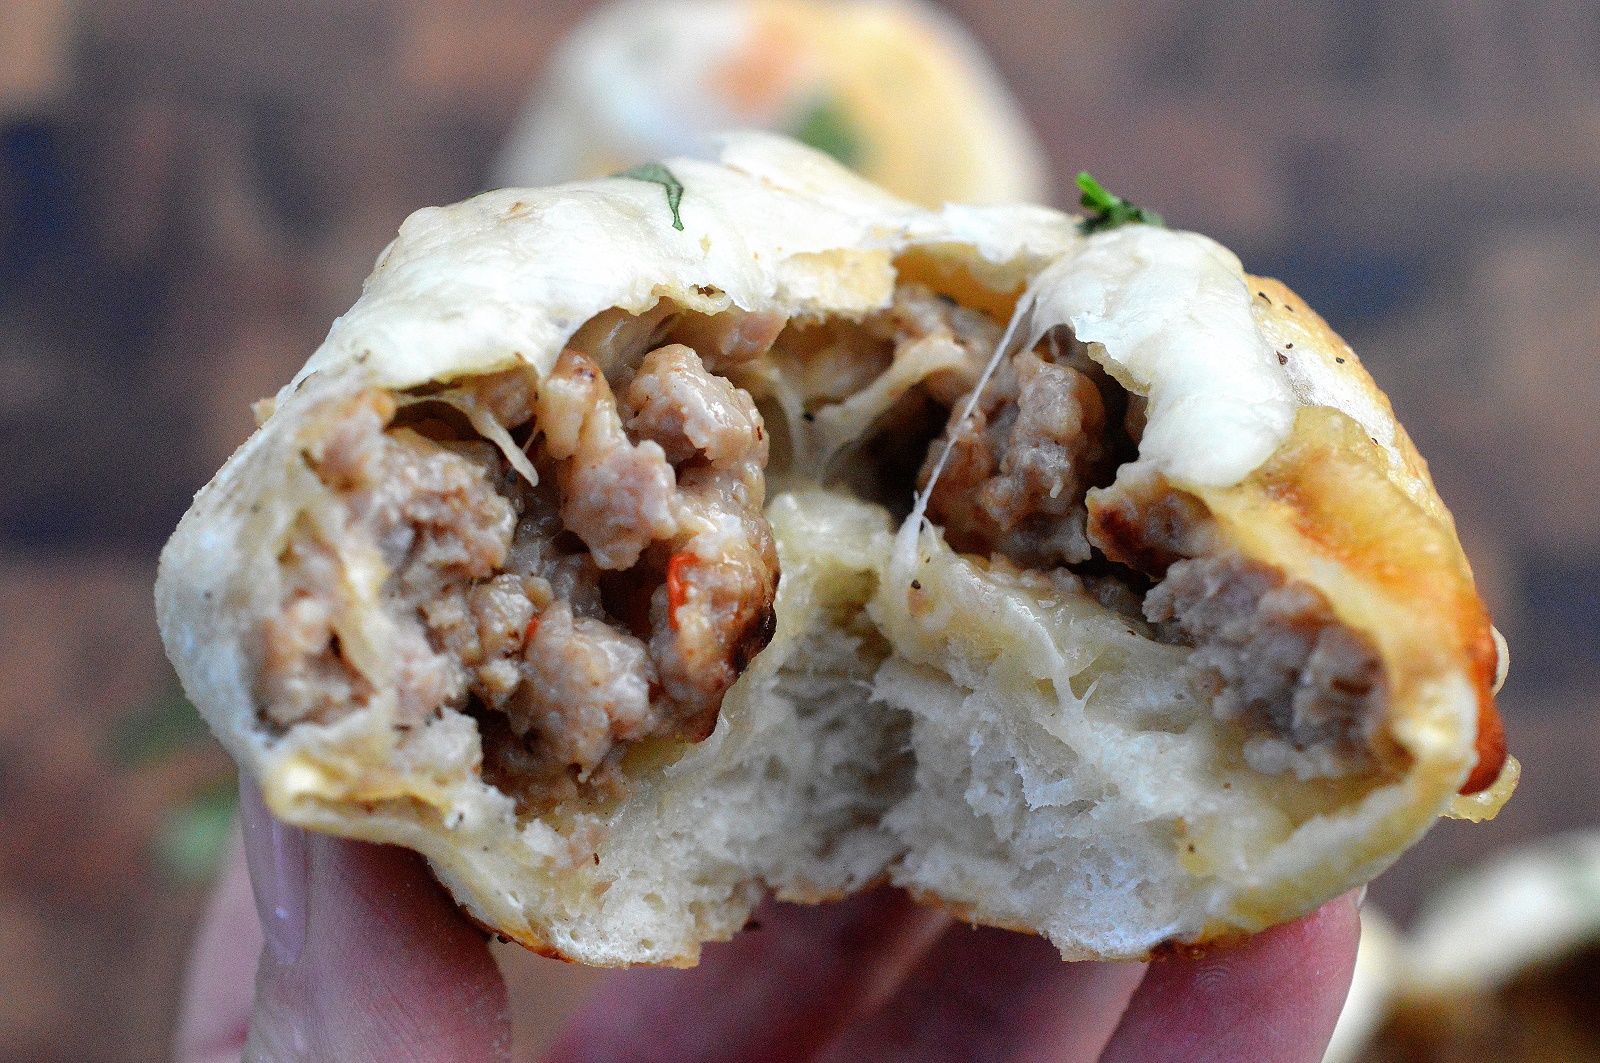 Cheesy Sausage Bombs! warm pizza dough filled with hot or sweet Italian sausage and Mozzarella cheese...Yum! 